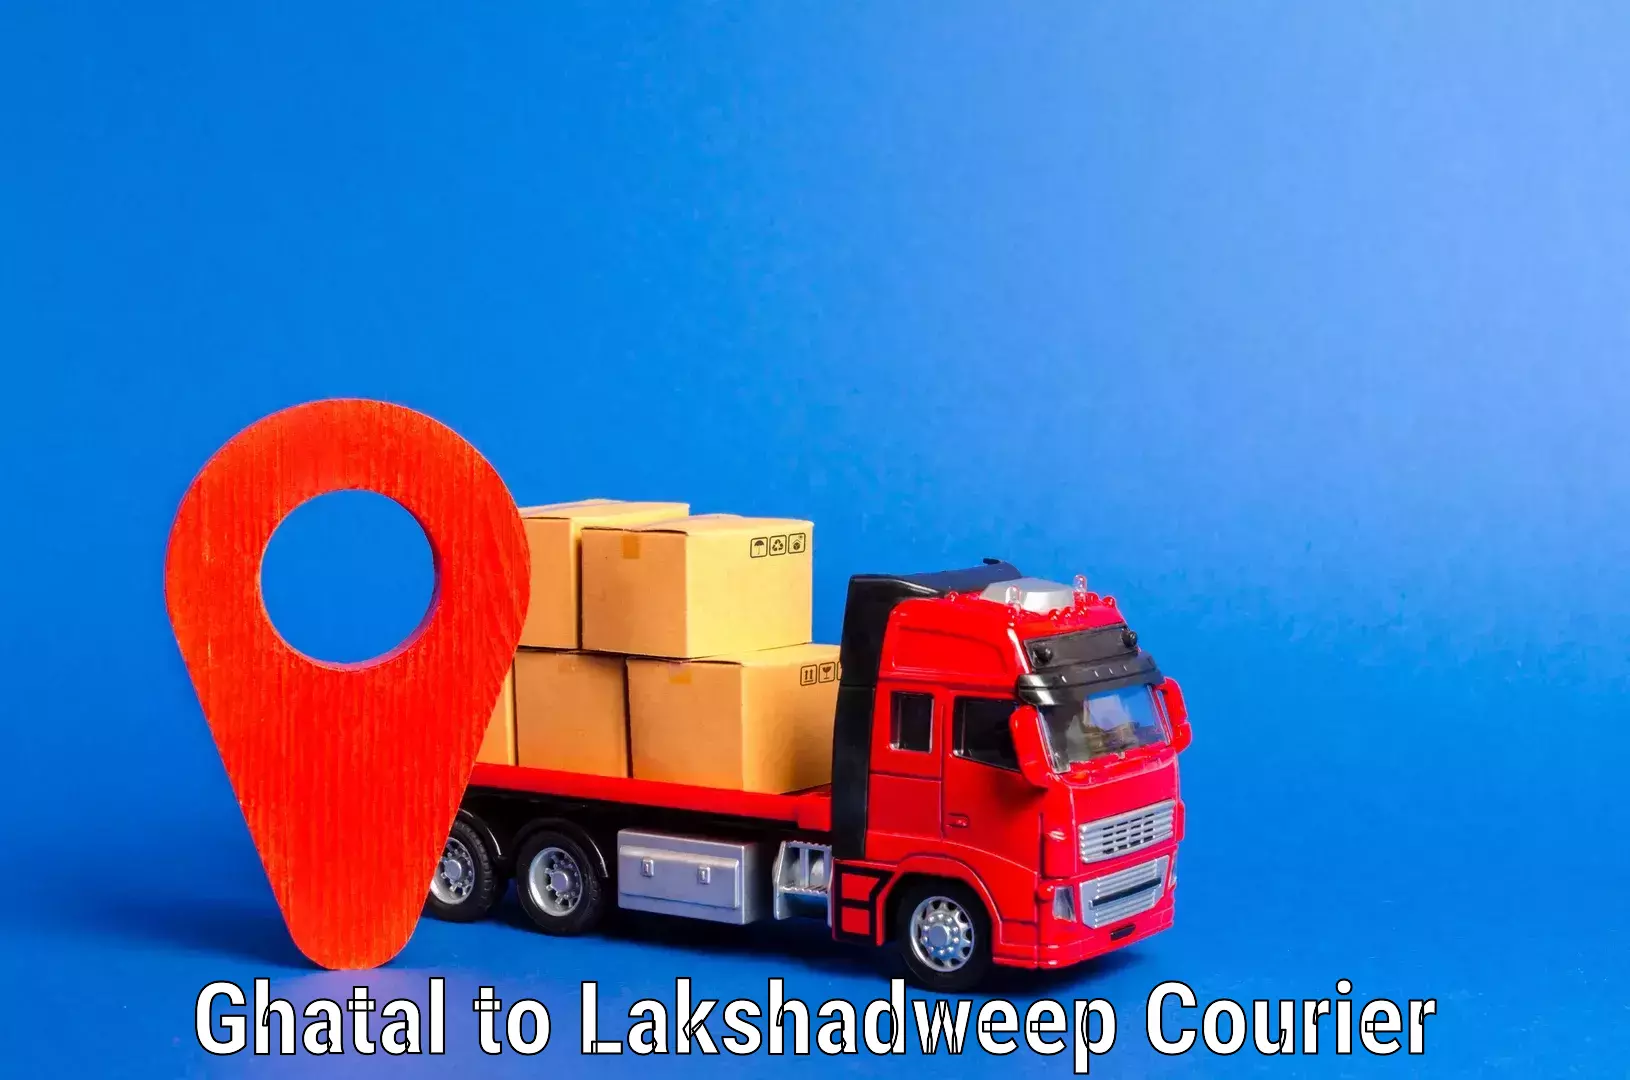 Specialized moving company Ghatal to Lakshadweep